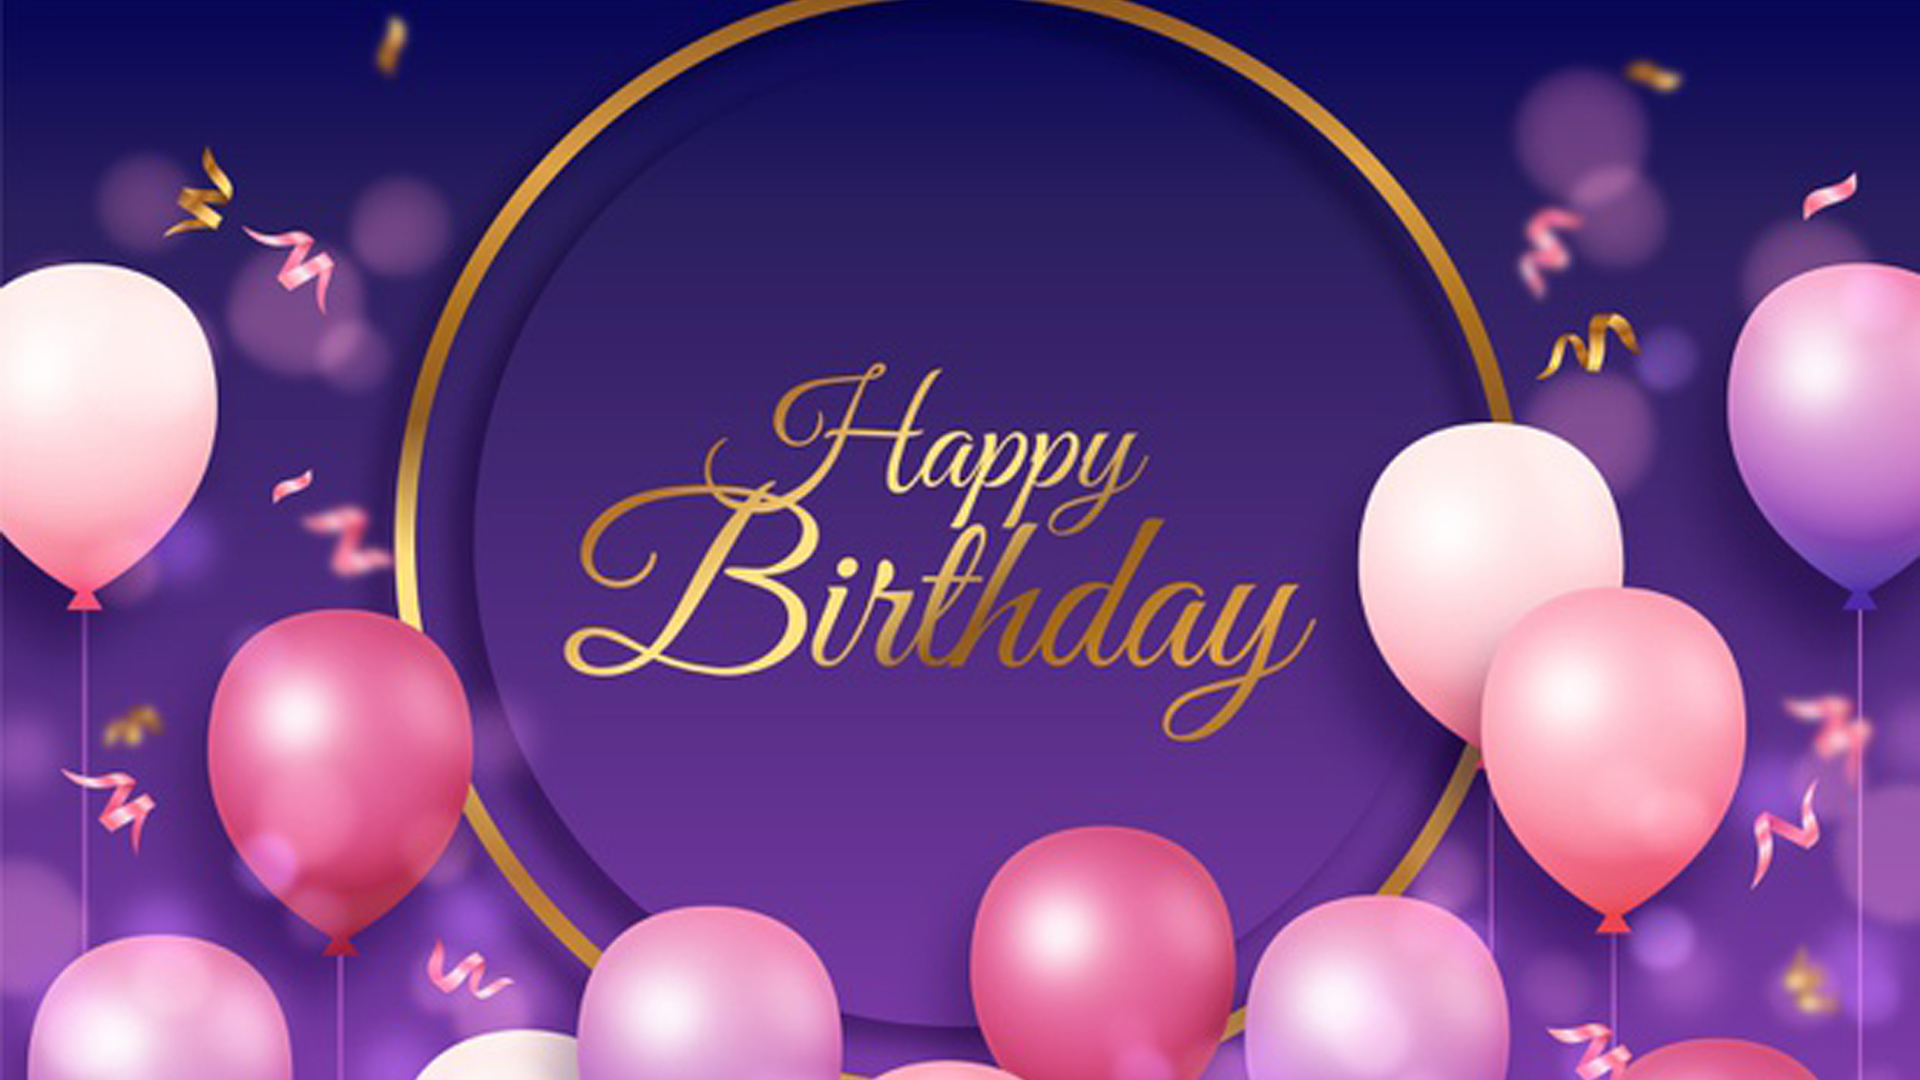 Happy Birthday Letters With Pink Balloons In Dark Purple Wallpaper HD Happy Birthday